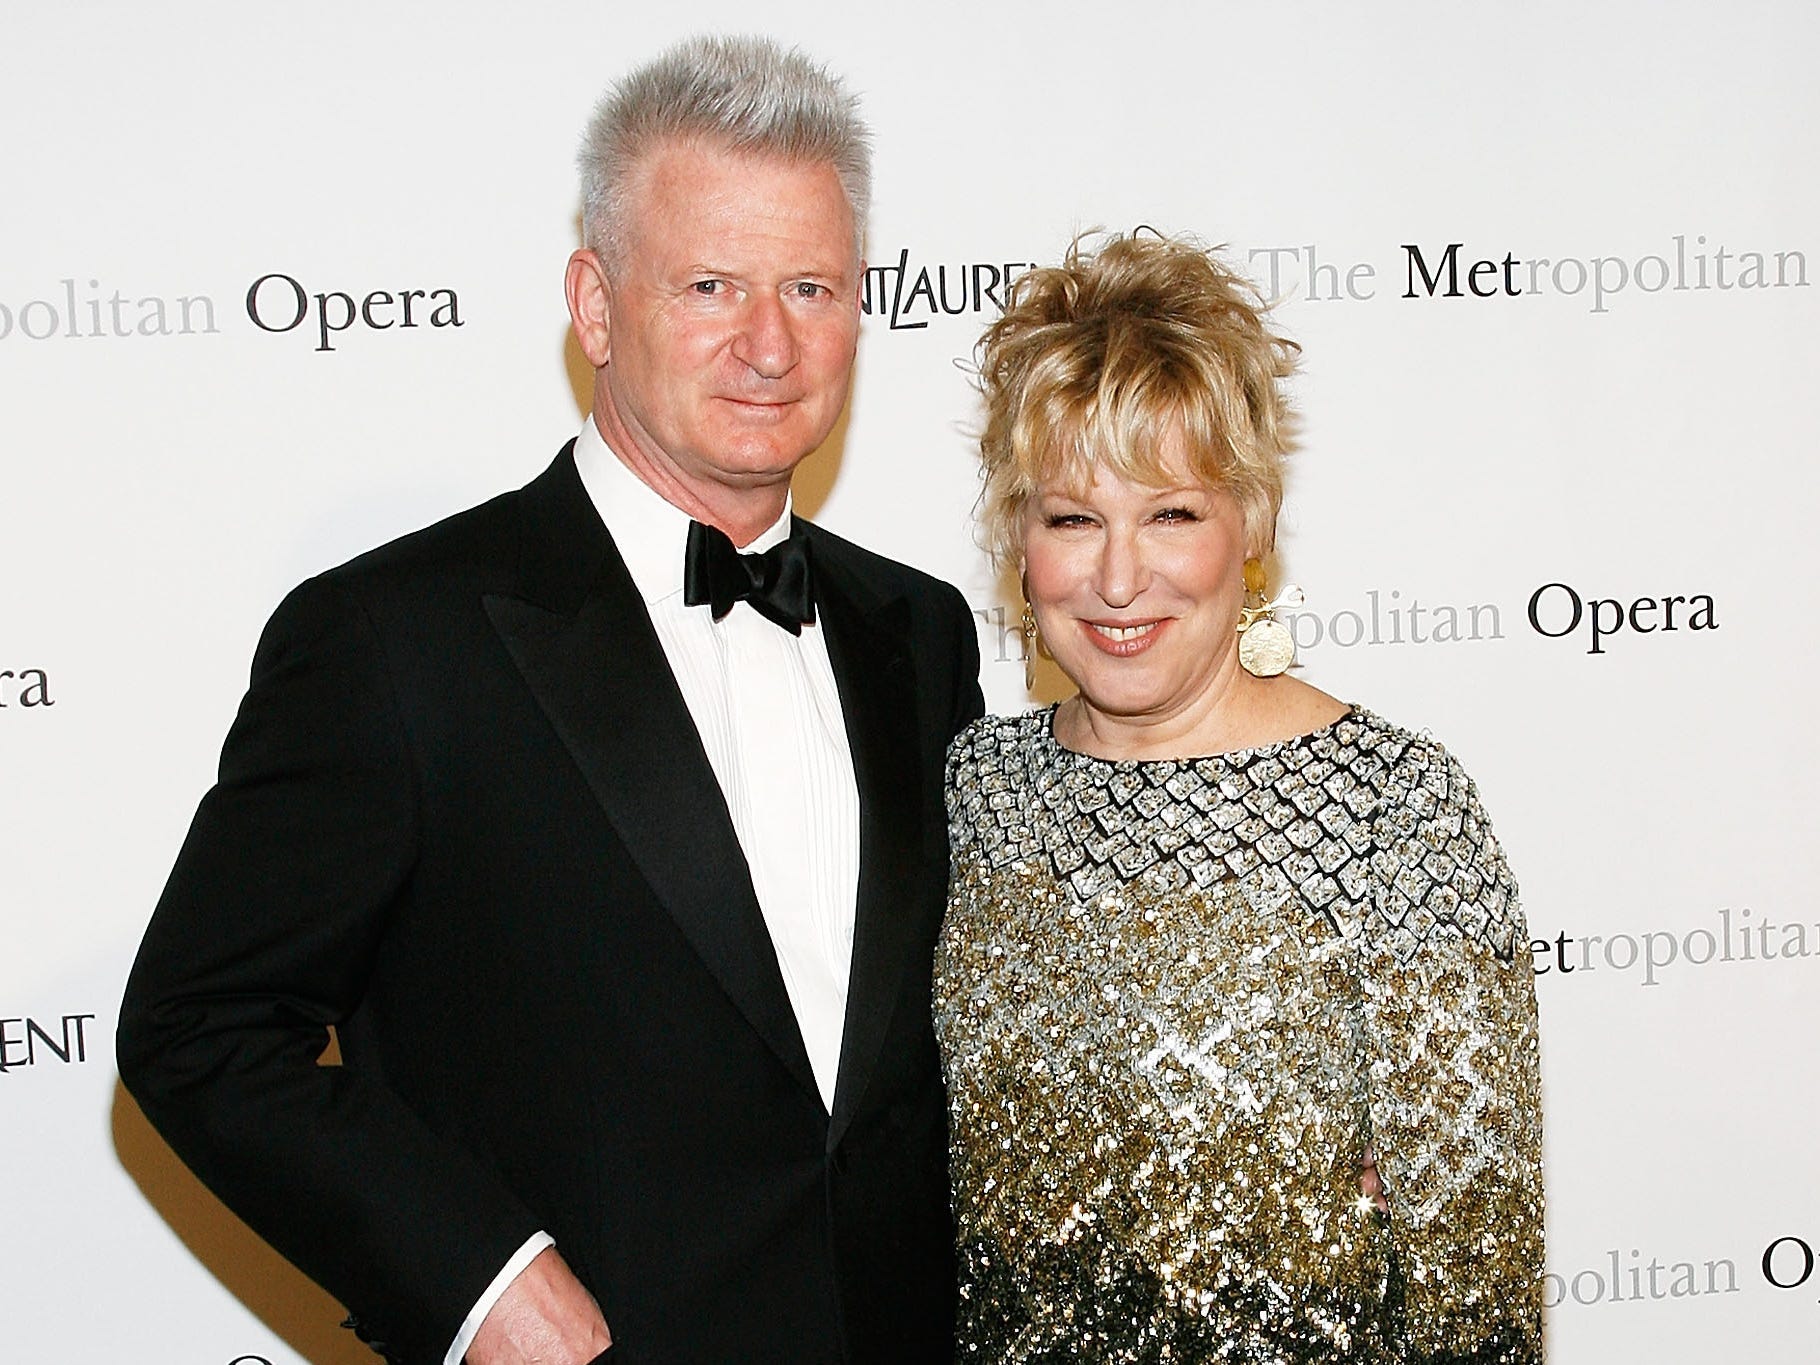 Bette Midler, 78, says the key to her nearly 40-year marriage is sleeping in separate bedrooms